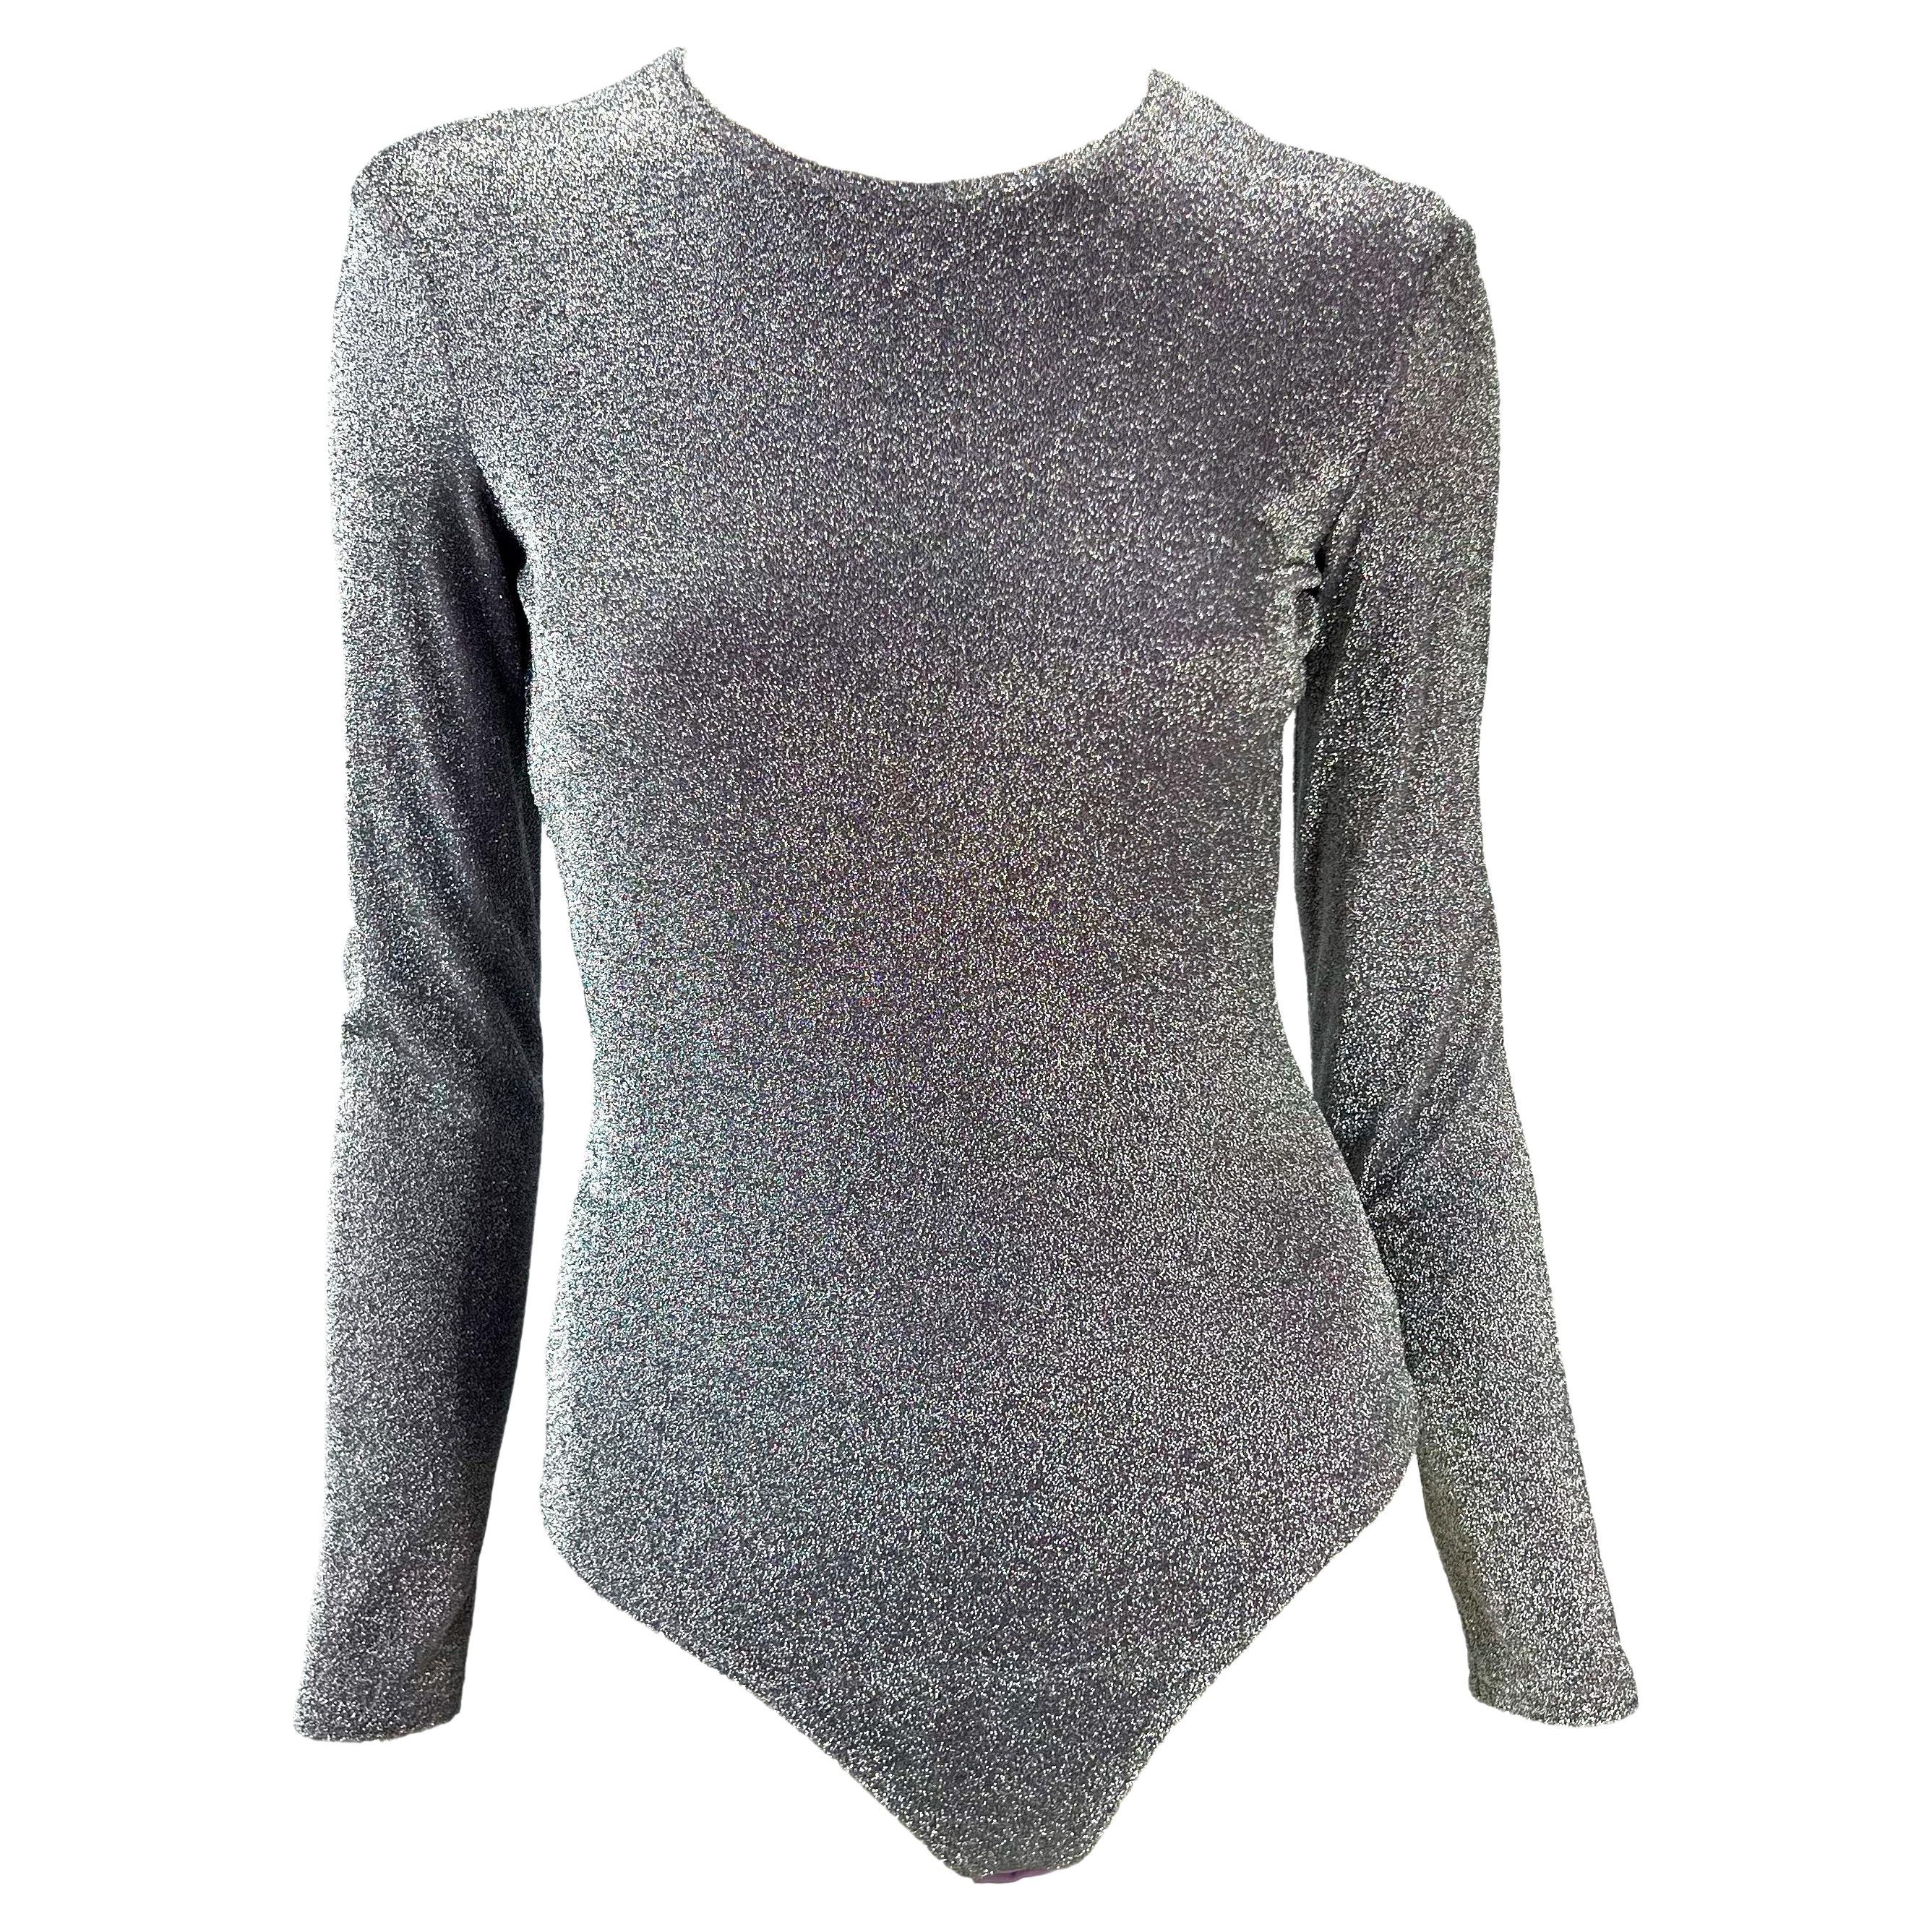 S/S 1994 Gianni Versace Couture Silver Lurex Periwinkle Stretch Bodysuit